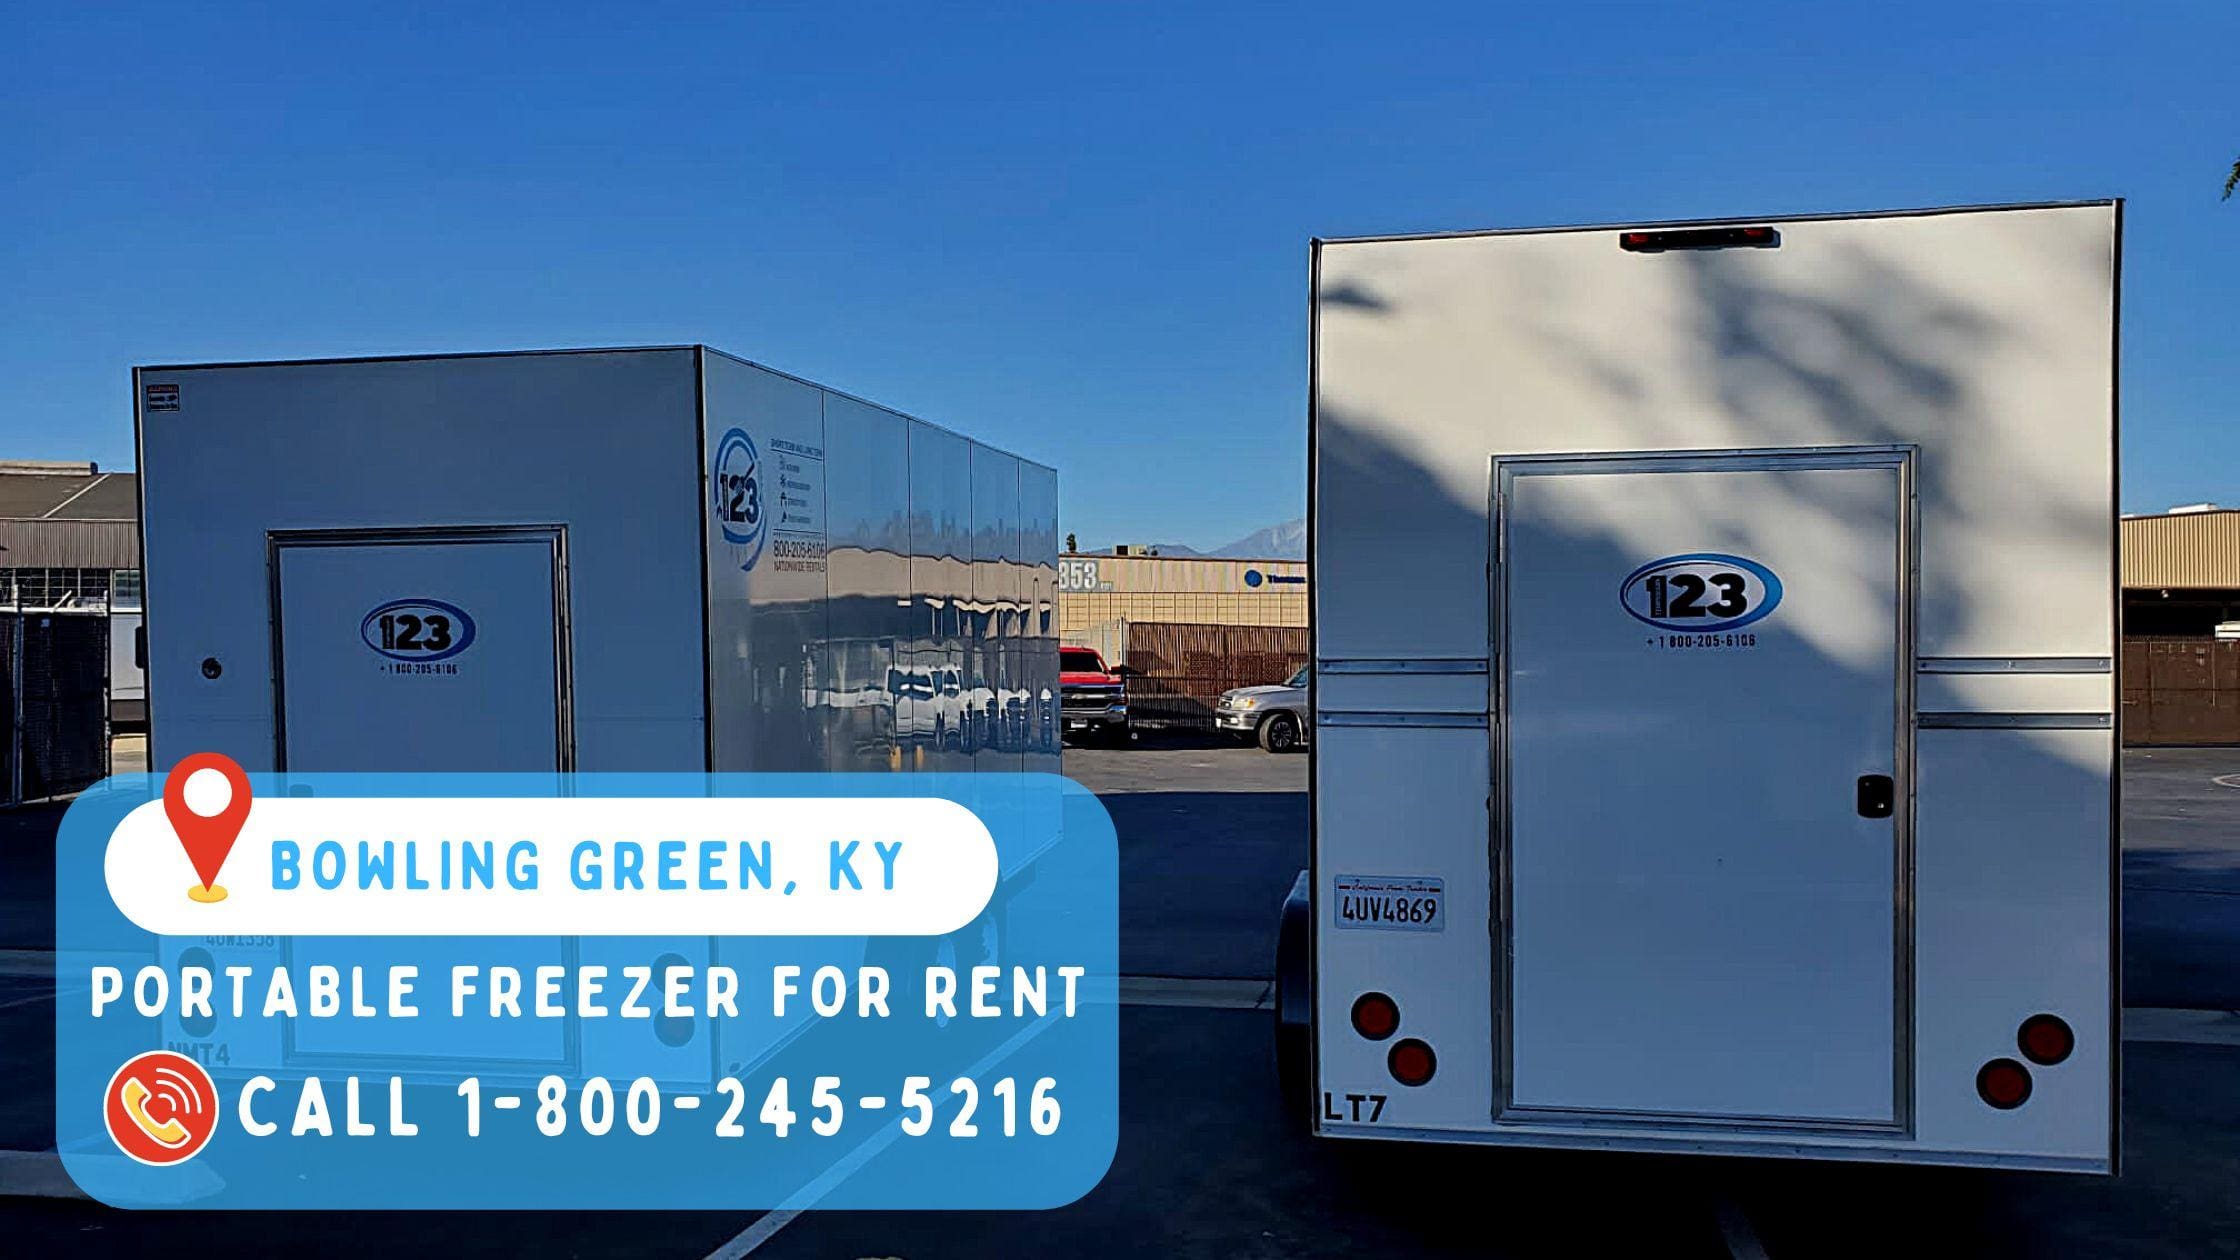 Portable freezer for rent in Bowling Green, KY